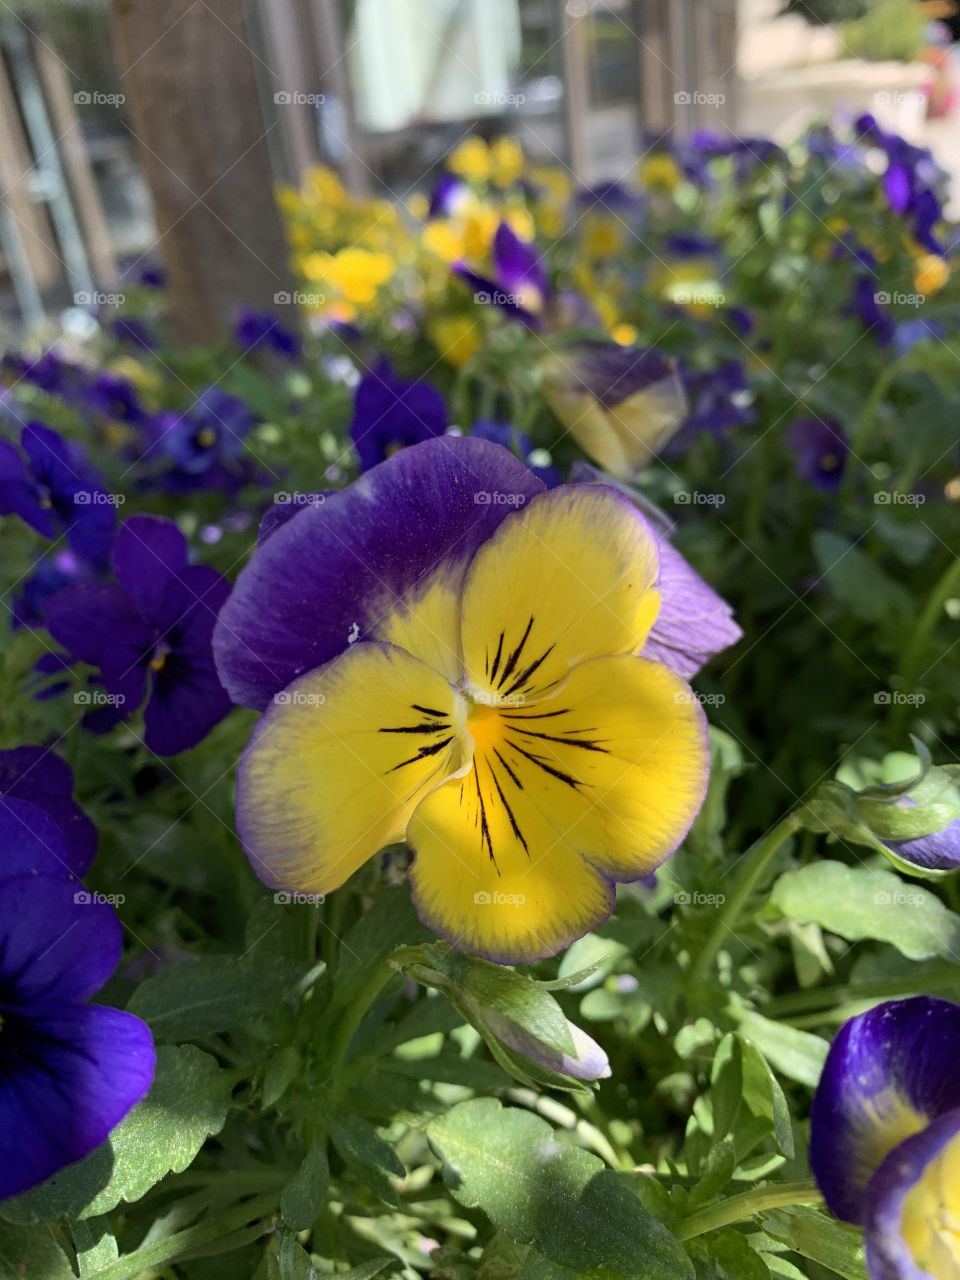 A pretty purple and yellow flower